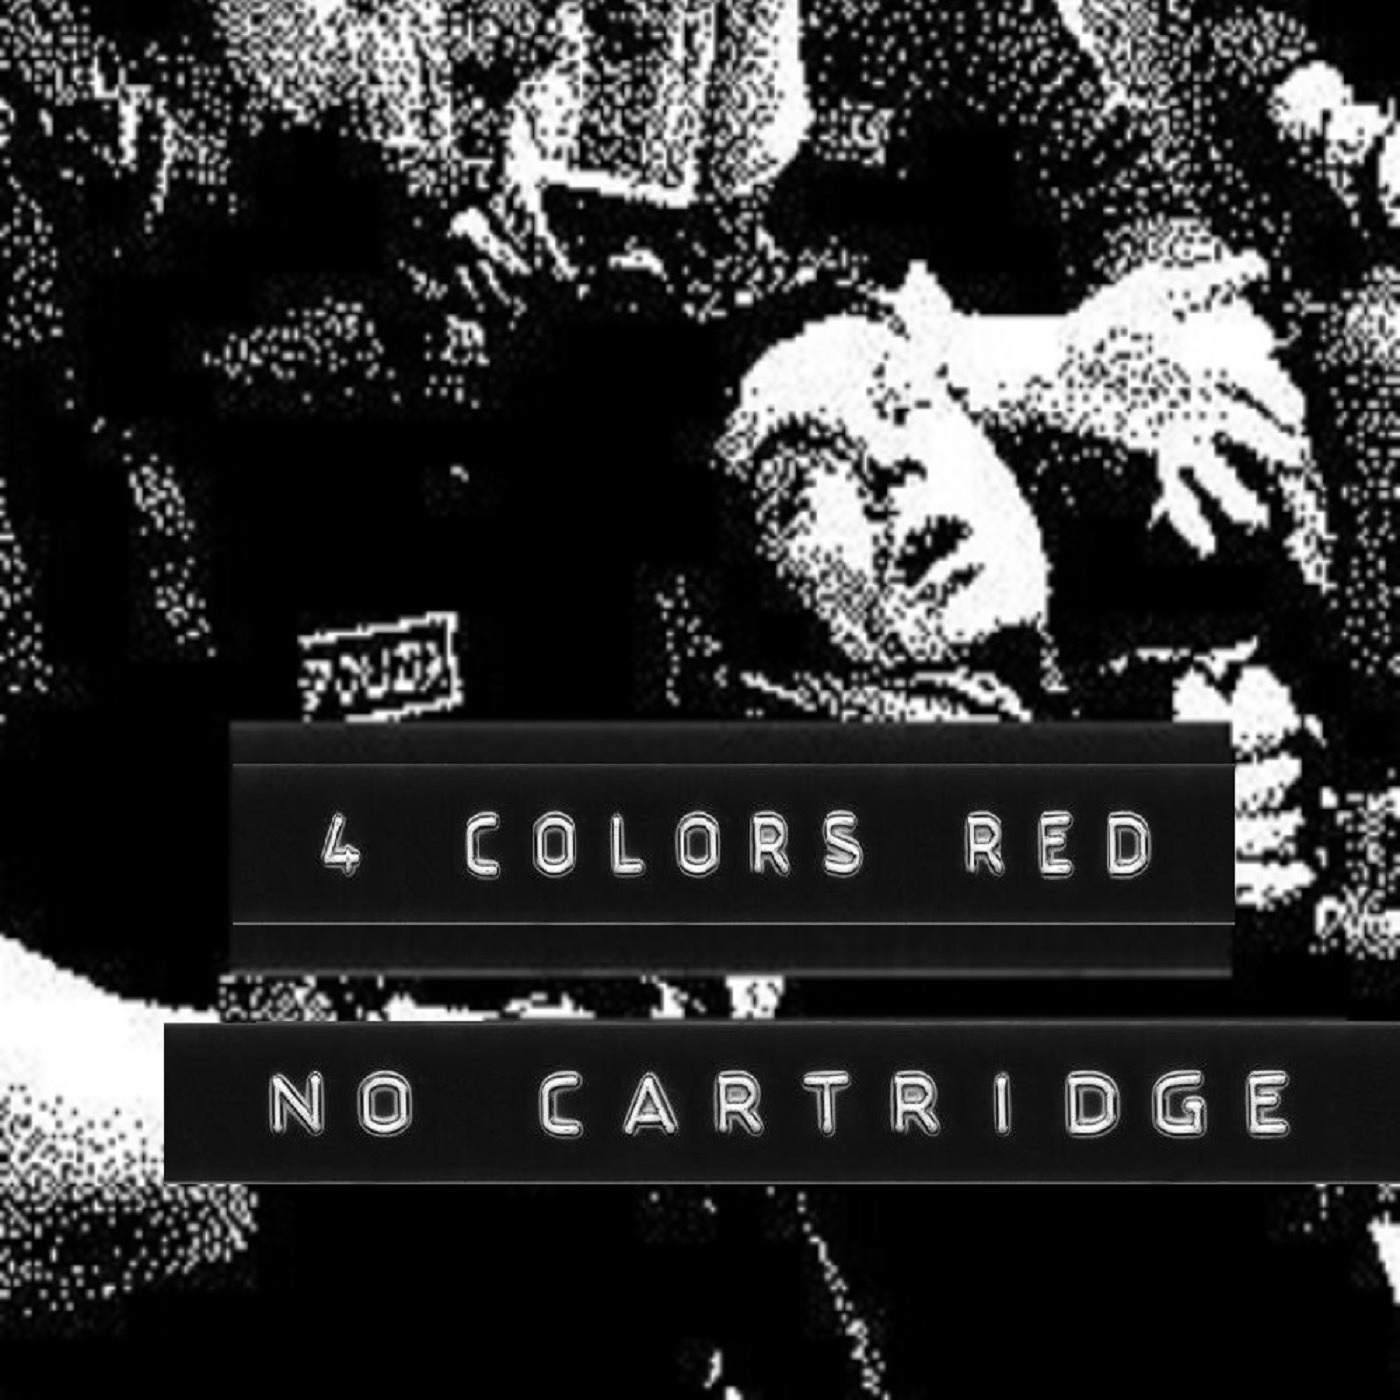 No Cartridge Presents: 4 Colors Red 1 with Podside Pete!